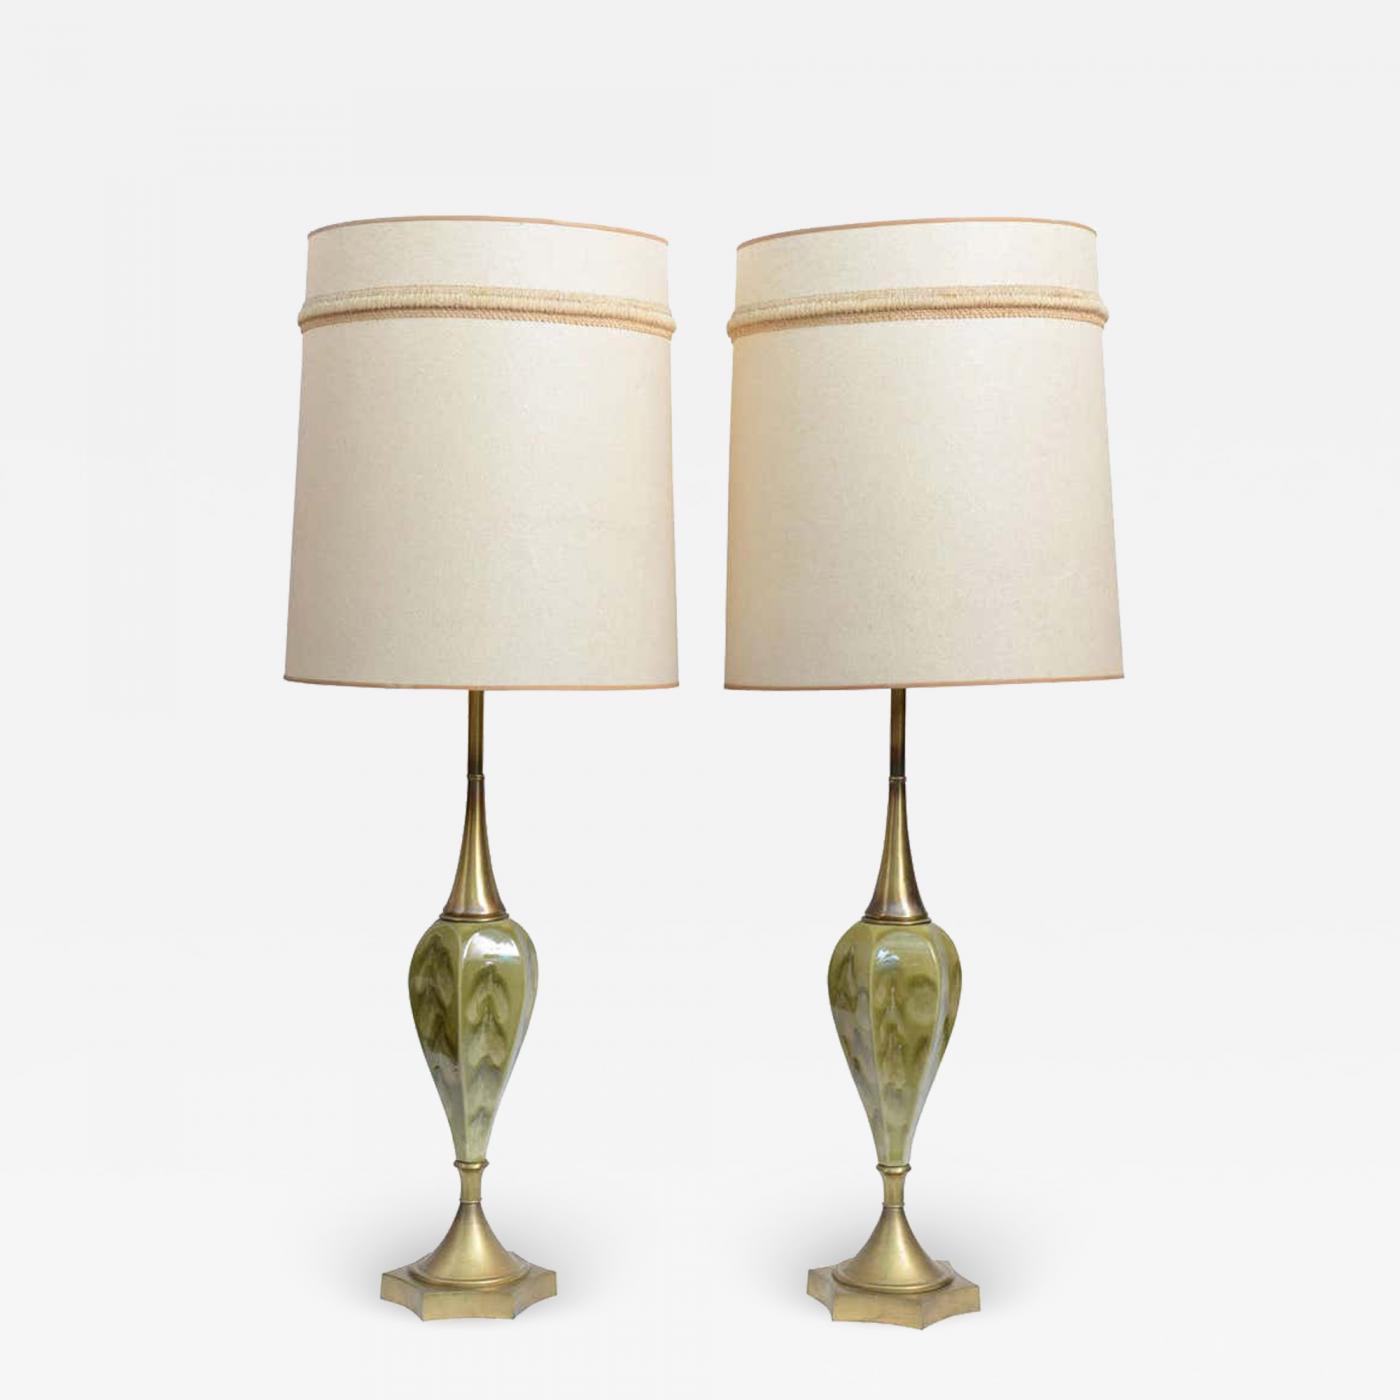 Rembrandt Lamp Company - Green Pottery and Brass Table Lamps